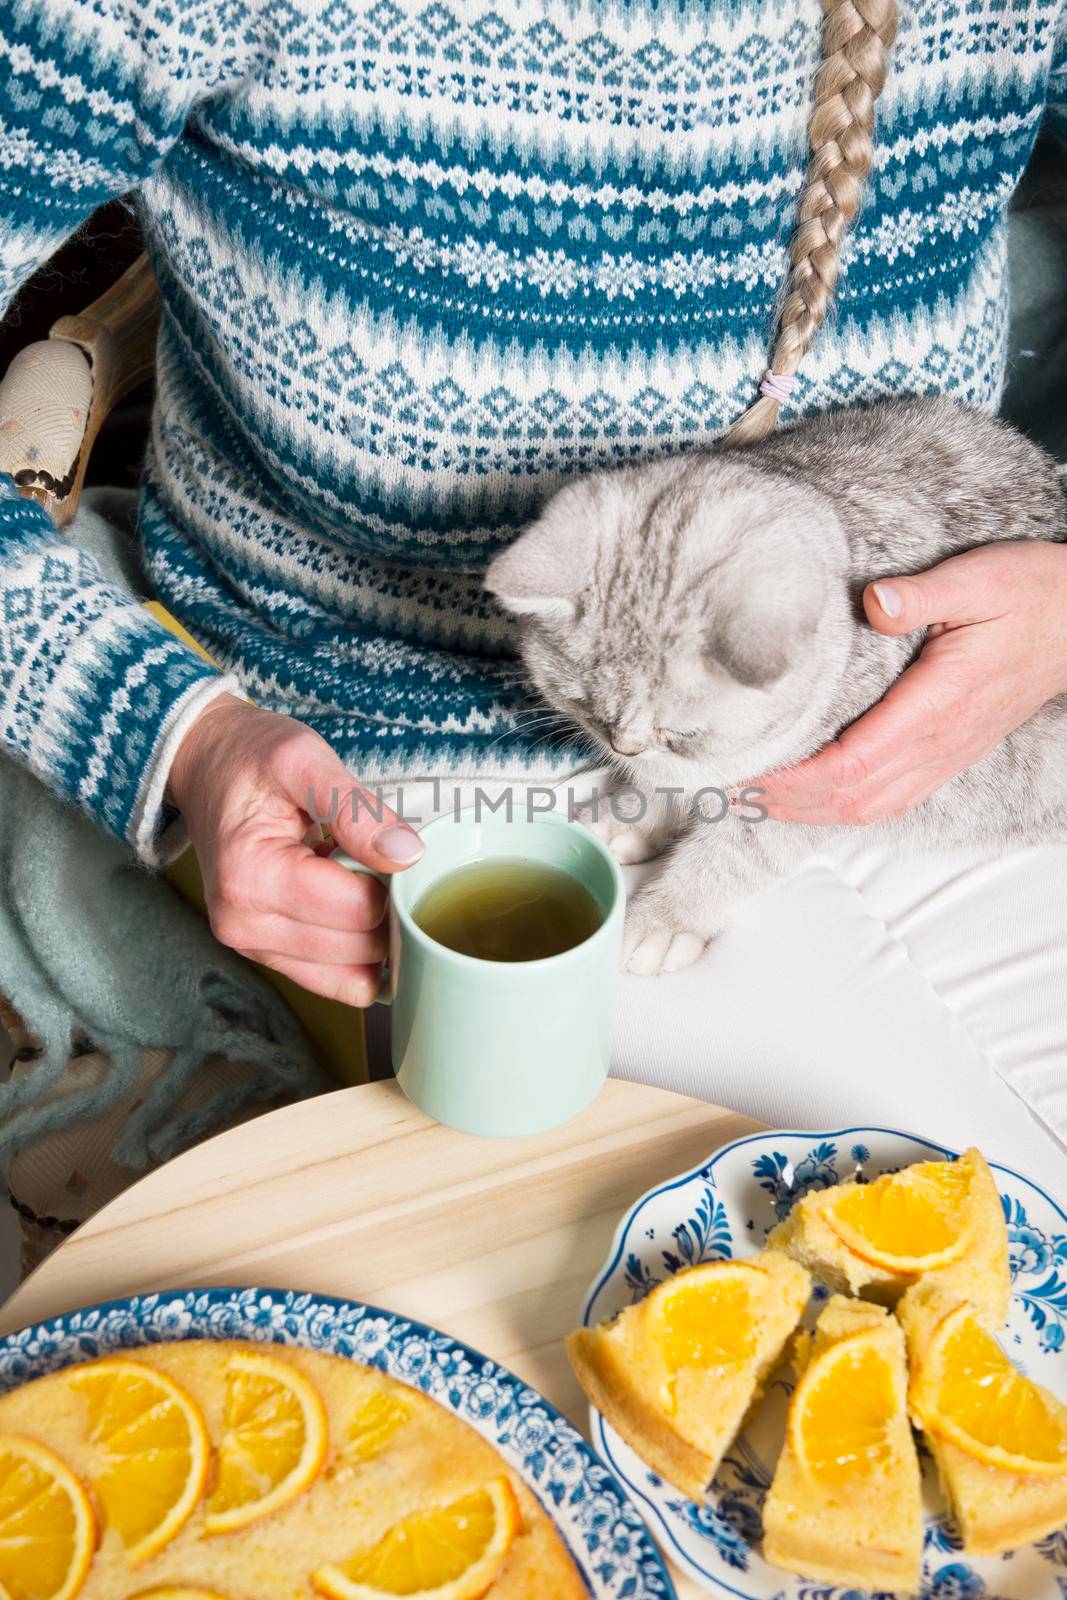 the hostess hands the gray kitten a piece of cake in the palm of her hand, we have a cup of tea and an orange pie, cozy vibes, a warm homely atmosphere. High quality photo